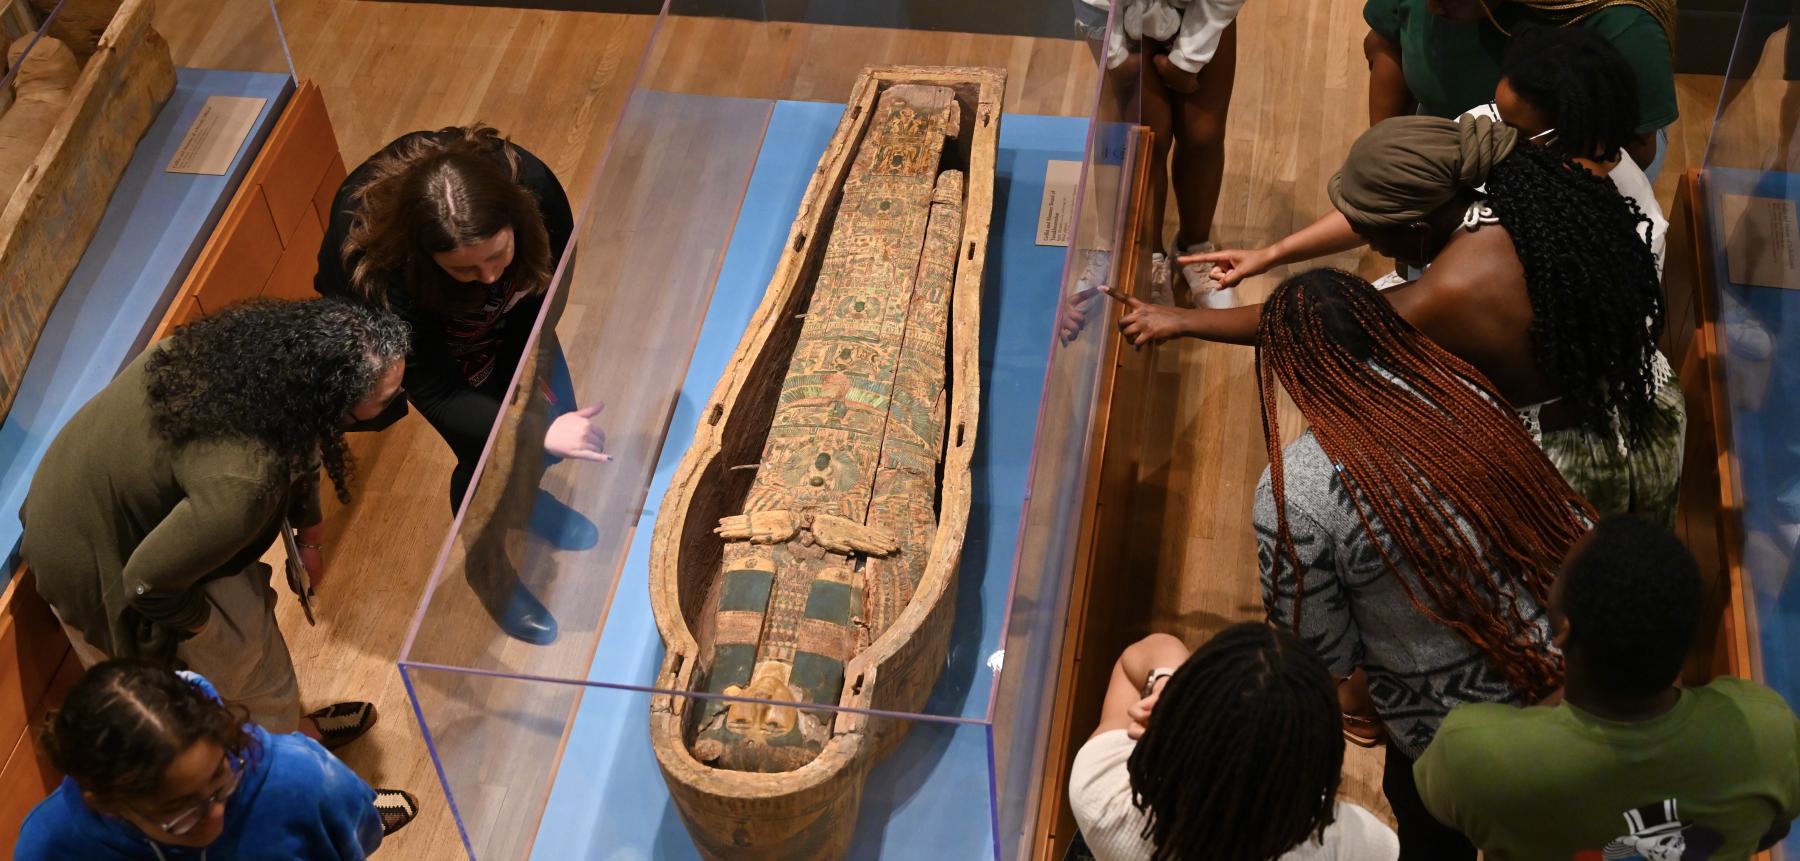 A group of adults gather around an ancient Egyptian coffin and point at images on the side